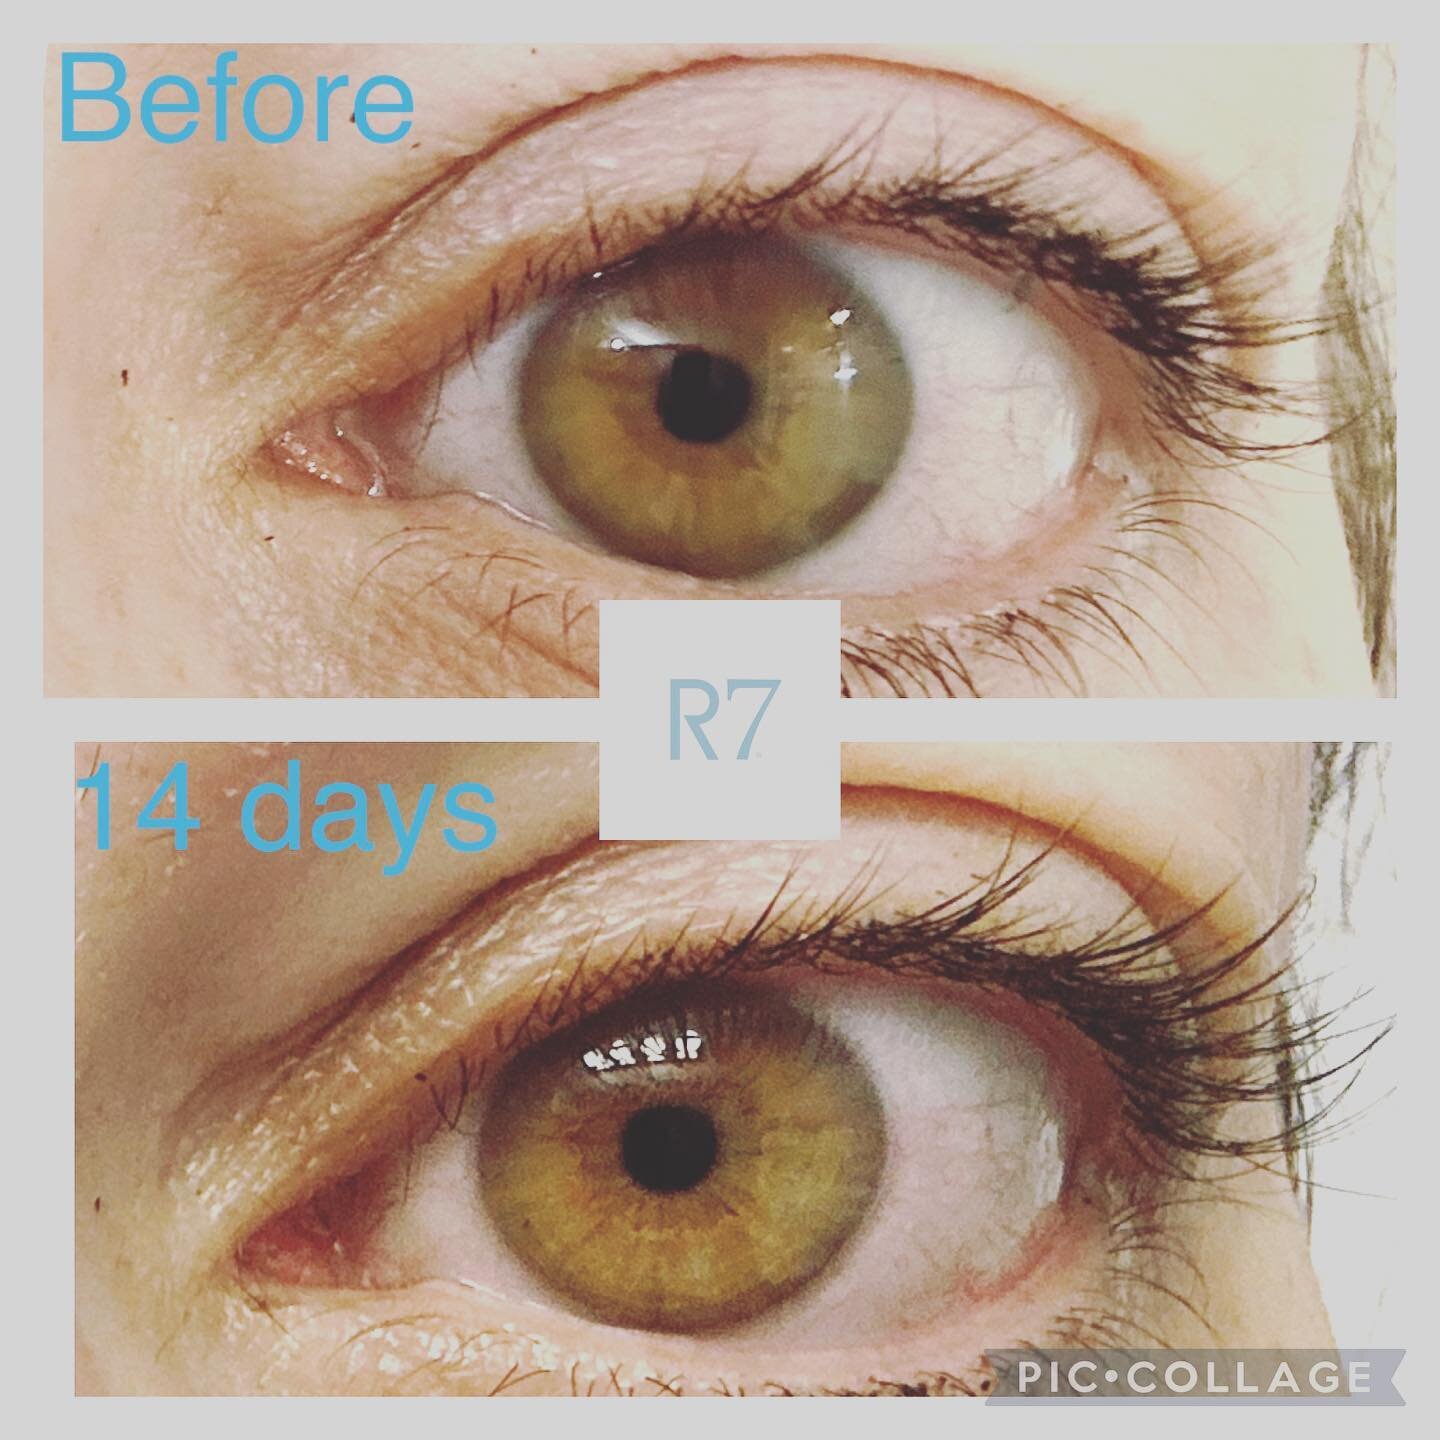 My results in 14 days with the @revive7science mascara! My lashes are softer/thicker/longer! $49 plus taxes for the mascara! DM us or come by the salon @finsalonsk #longerlashes #revive7 #mascara #natural #7activeingredients